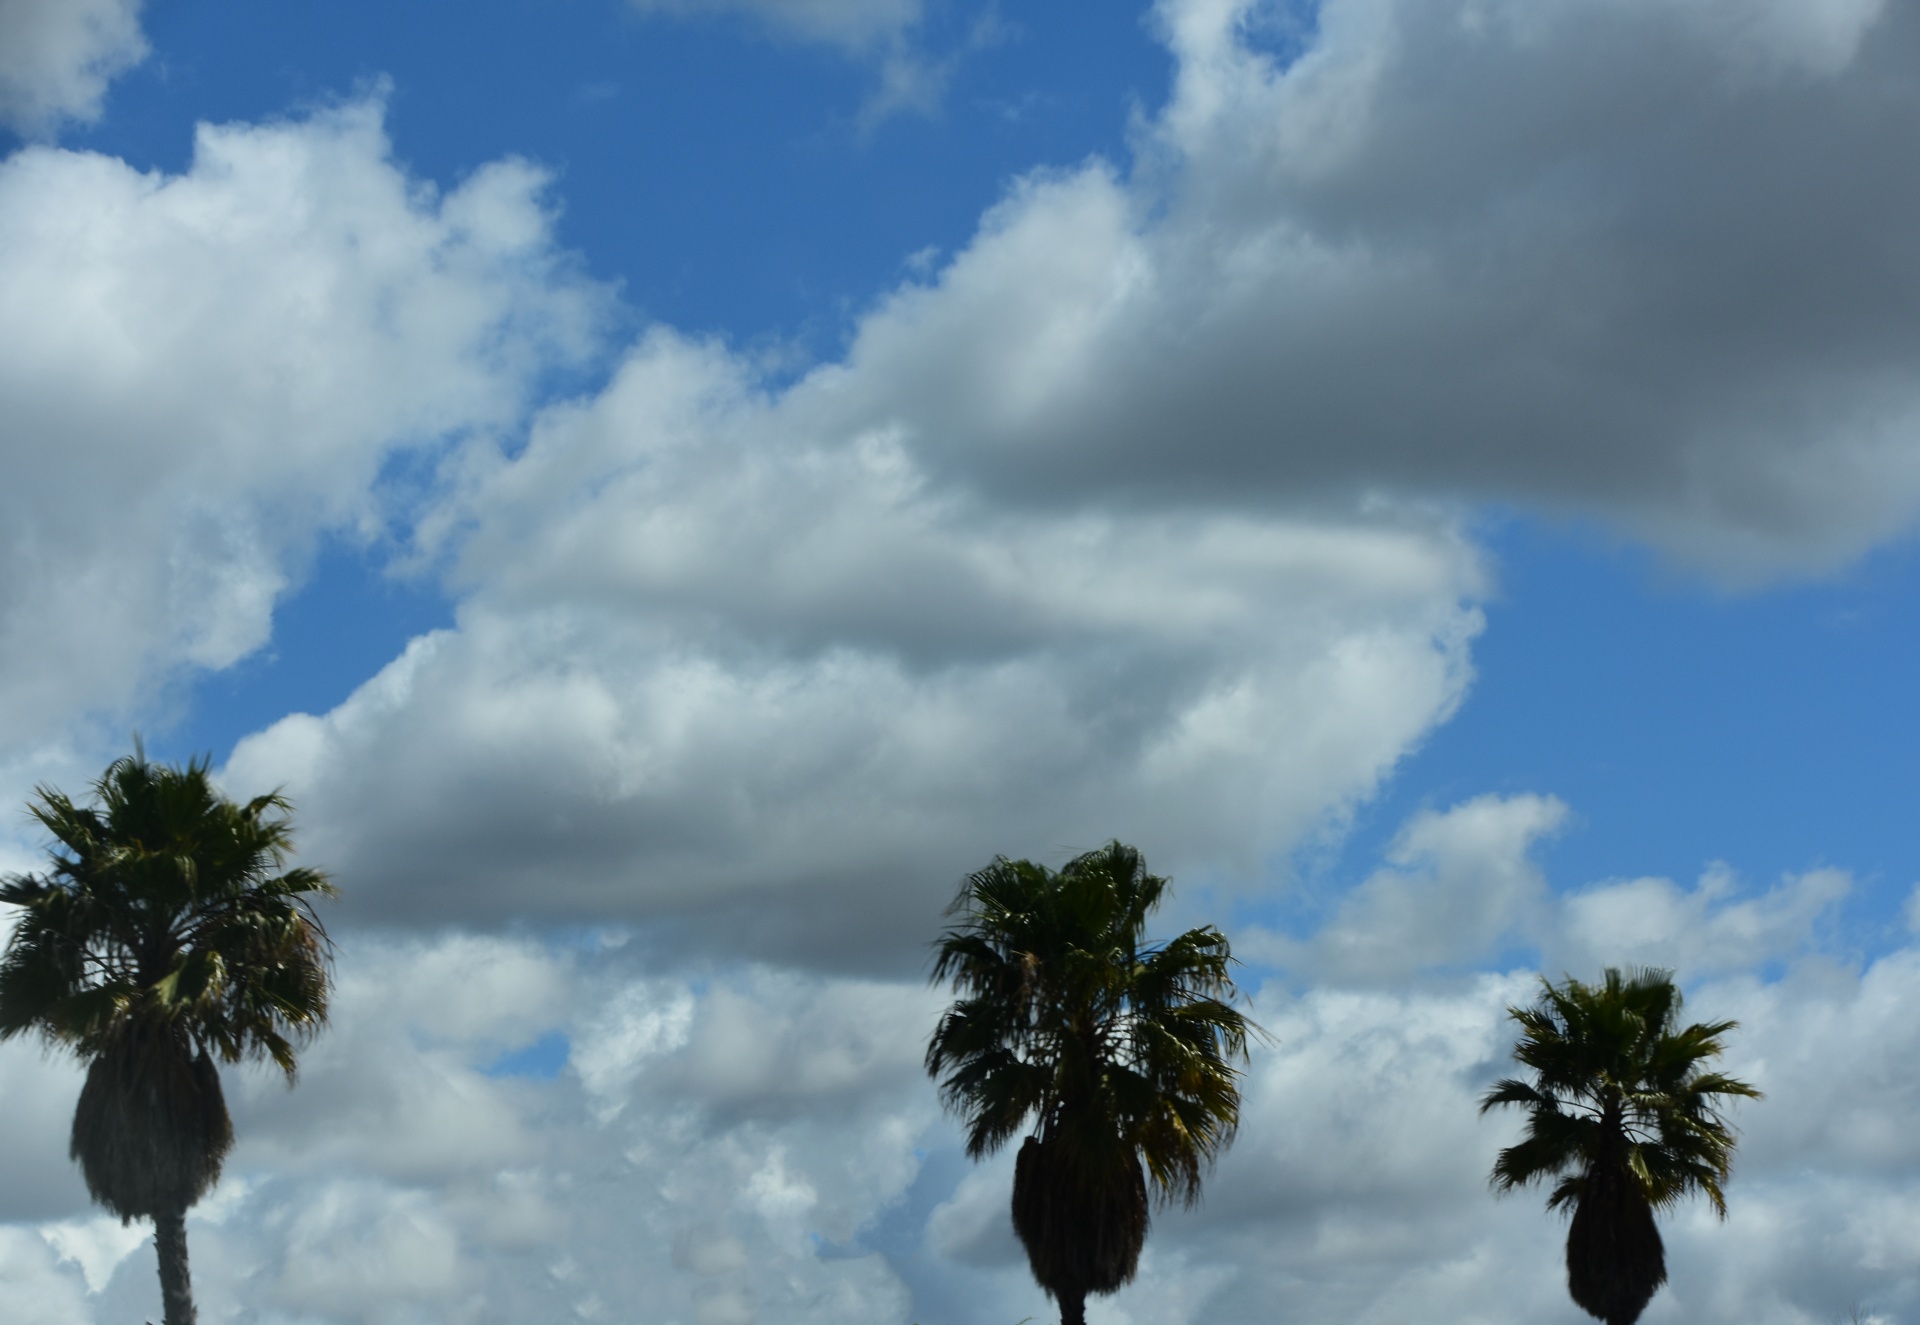 palm trees silhouetted against a blue sky full of the cotton like Cumulus clouds turning into storm clouds